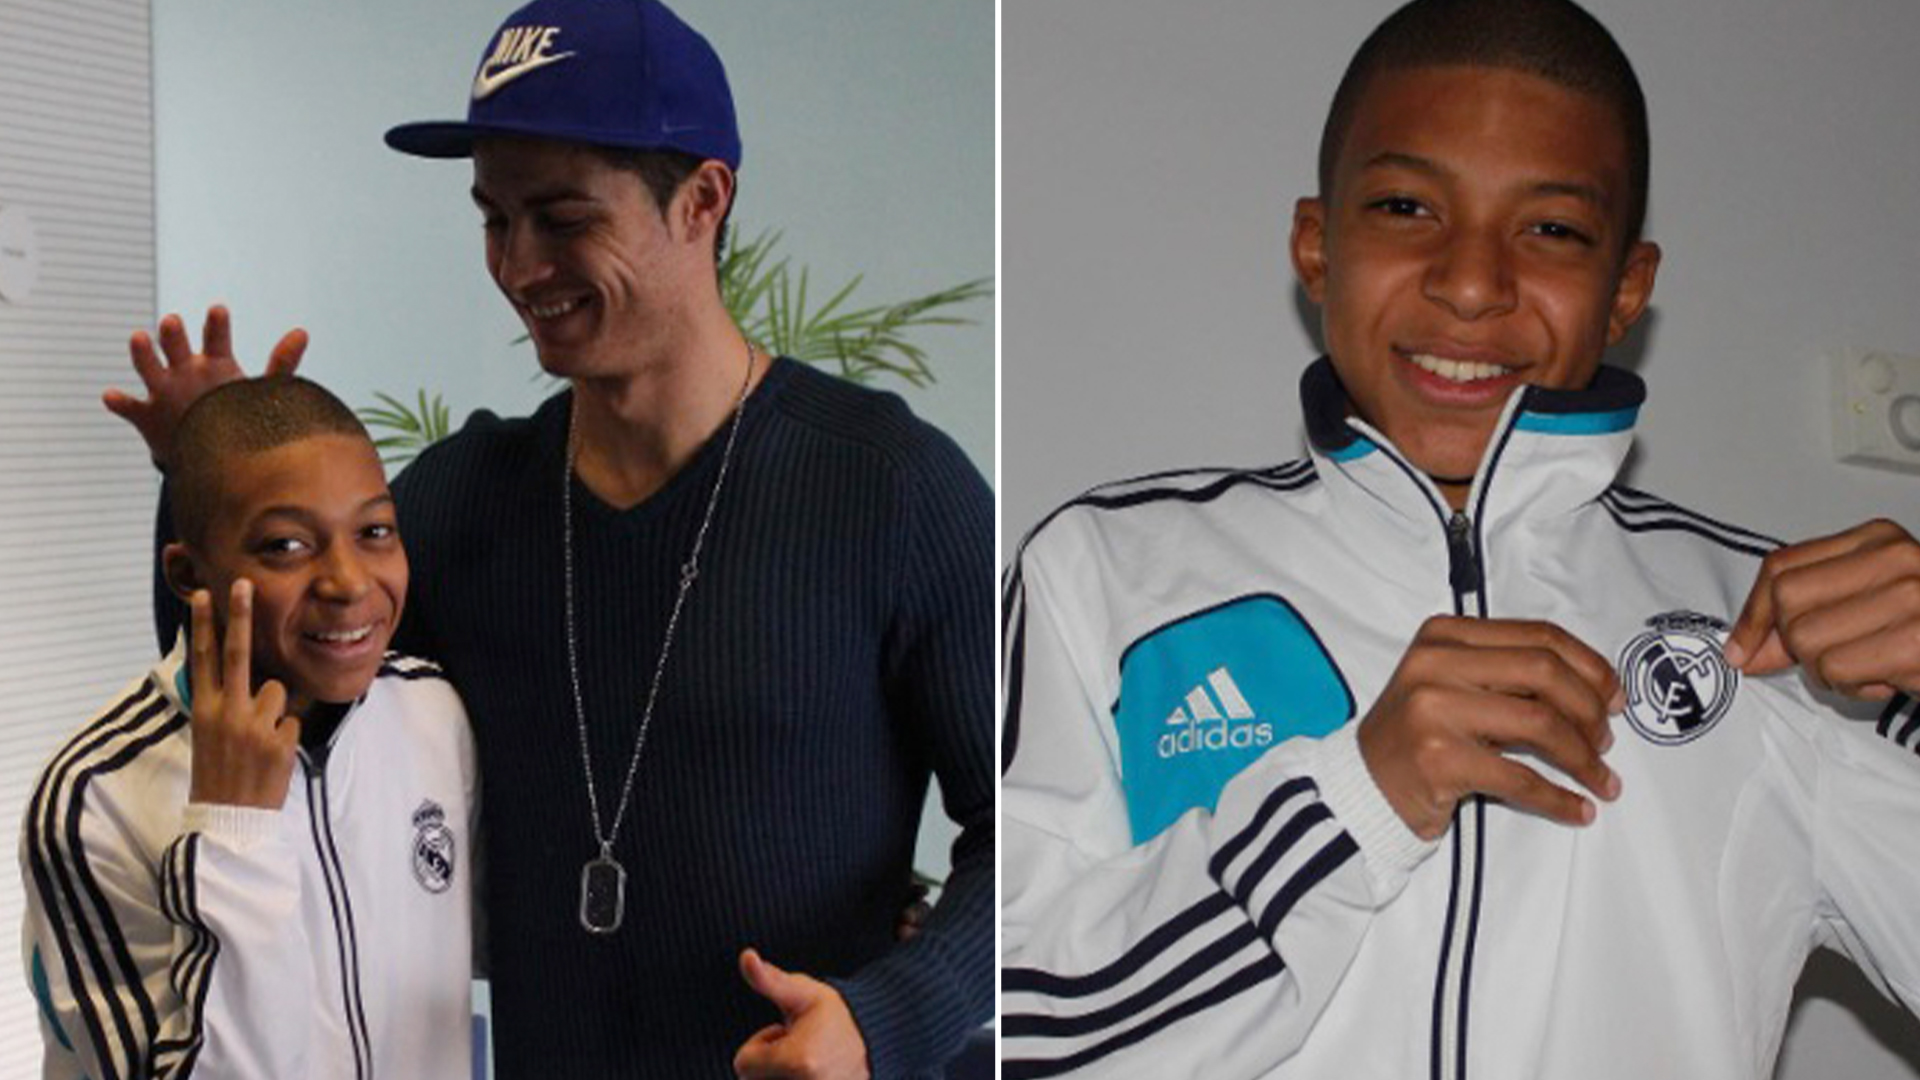 Inside Kylian Mbappé’s Historic Transfer to Real Madrid